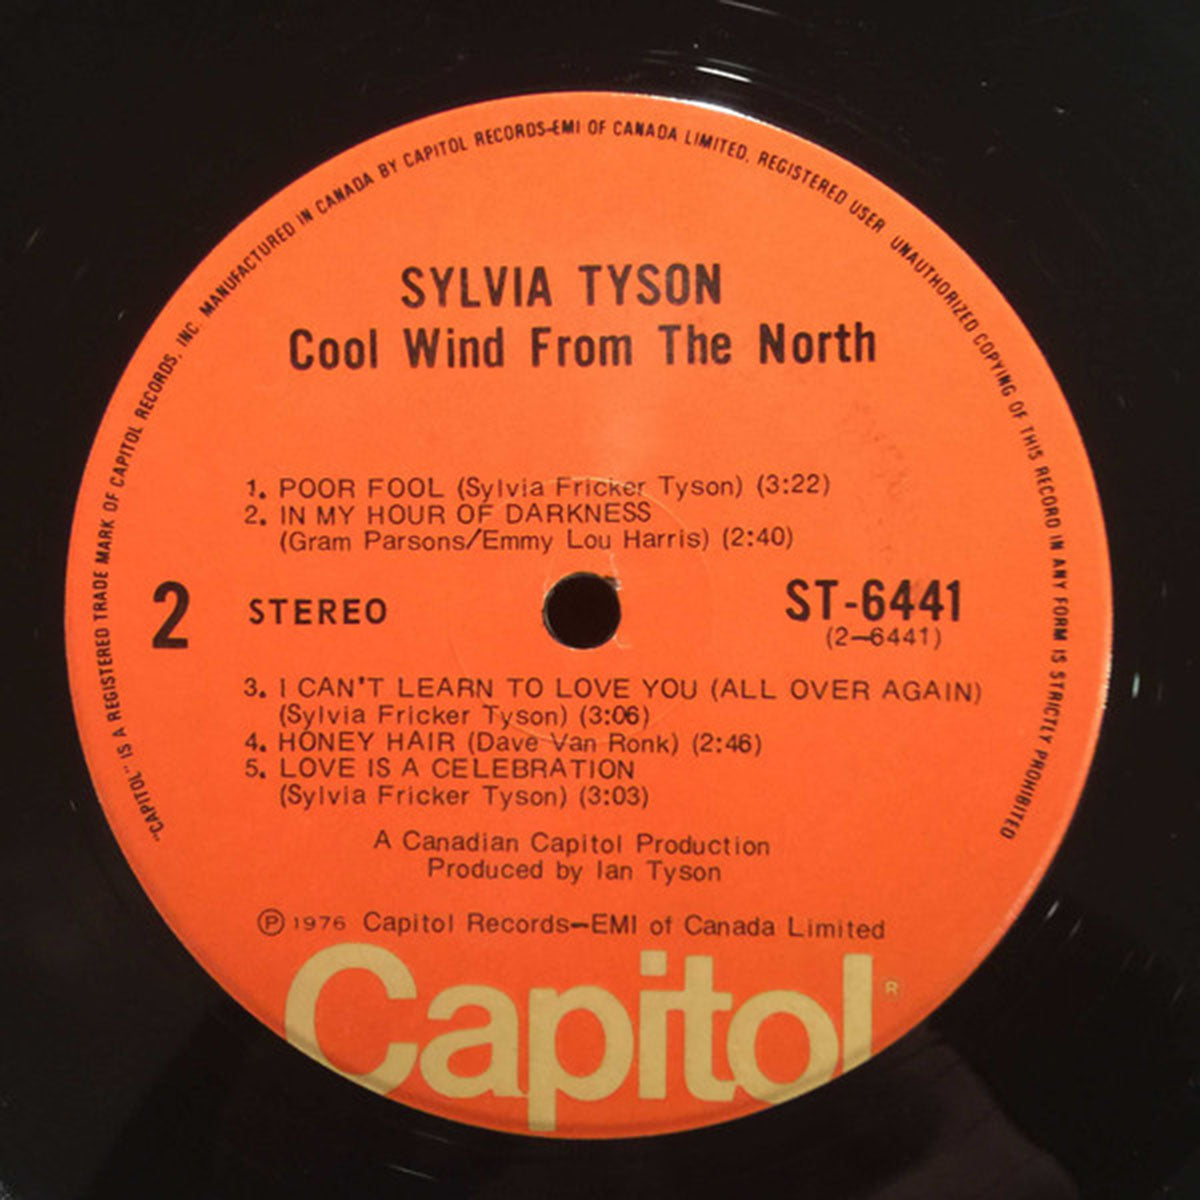 Sylvia Tyson – Cool Wind From The North